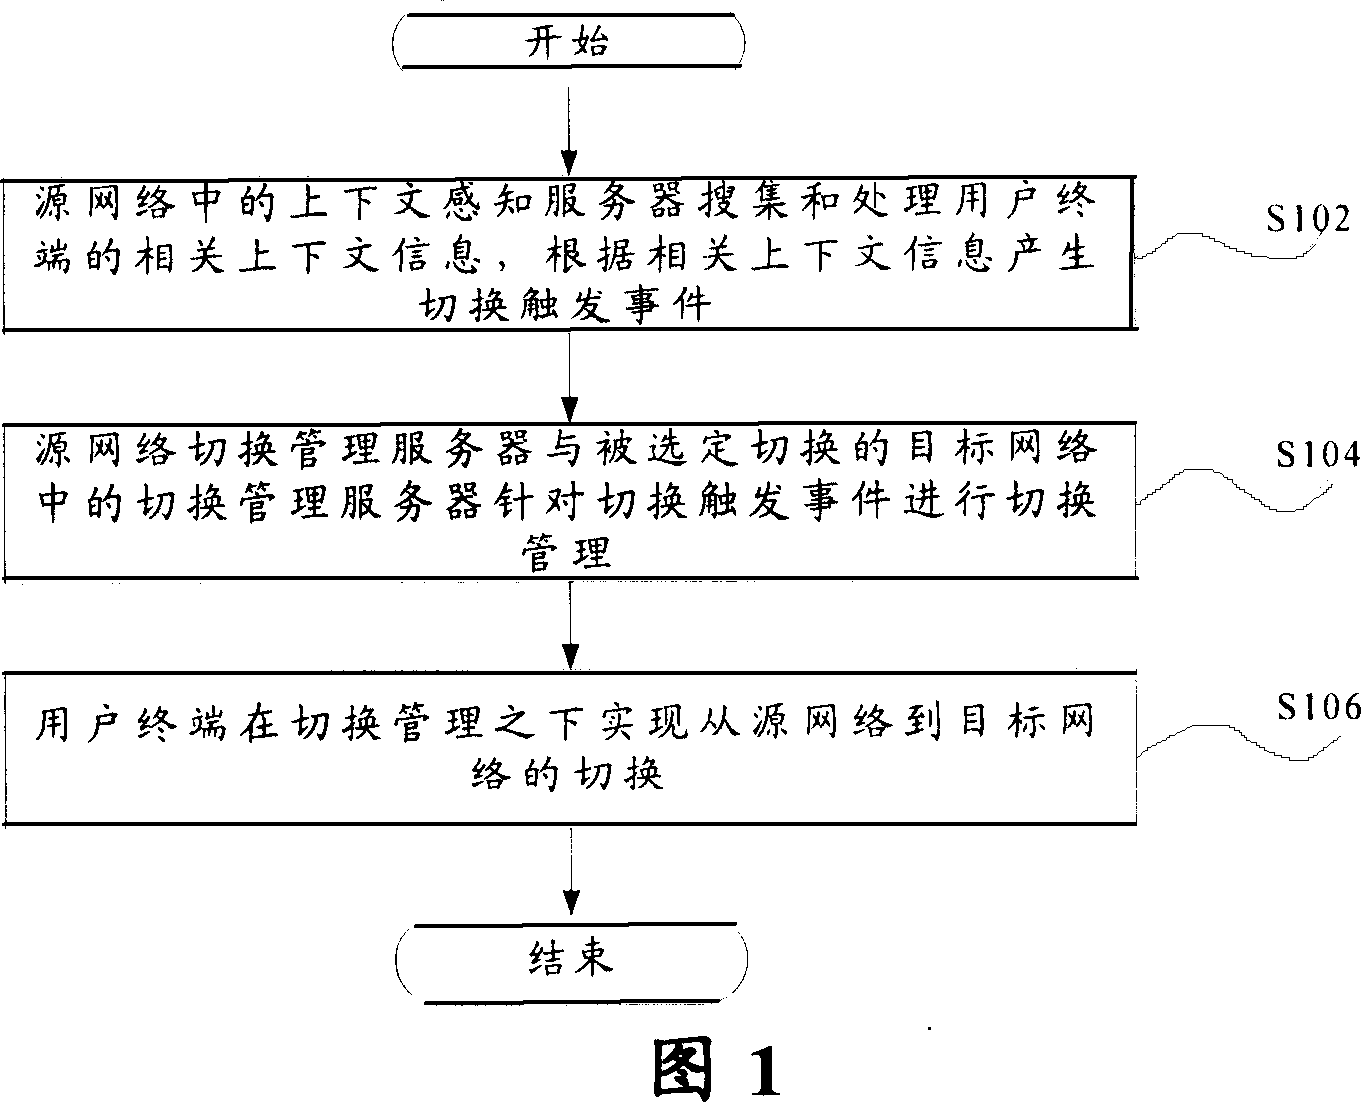 Cross-domain heterogeneous network system and adjacent network switching method and device